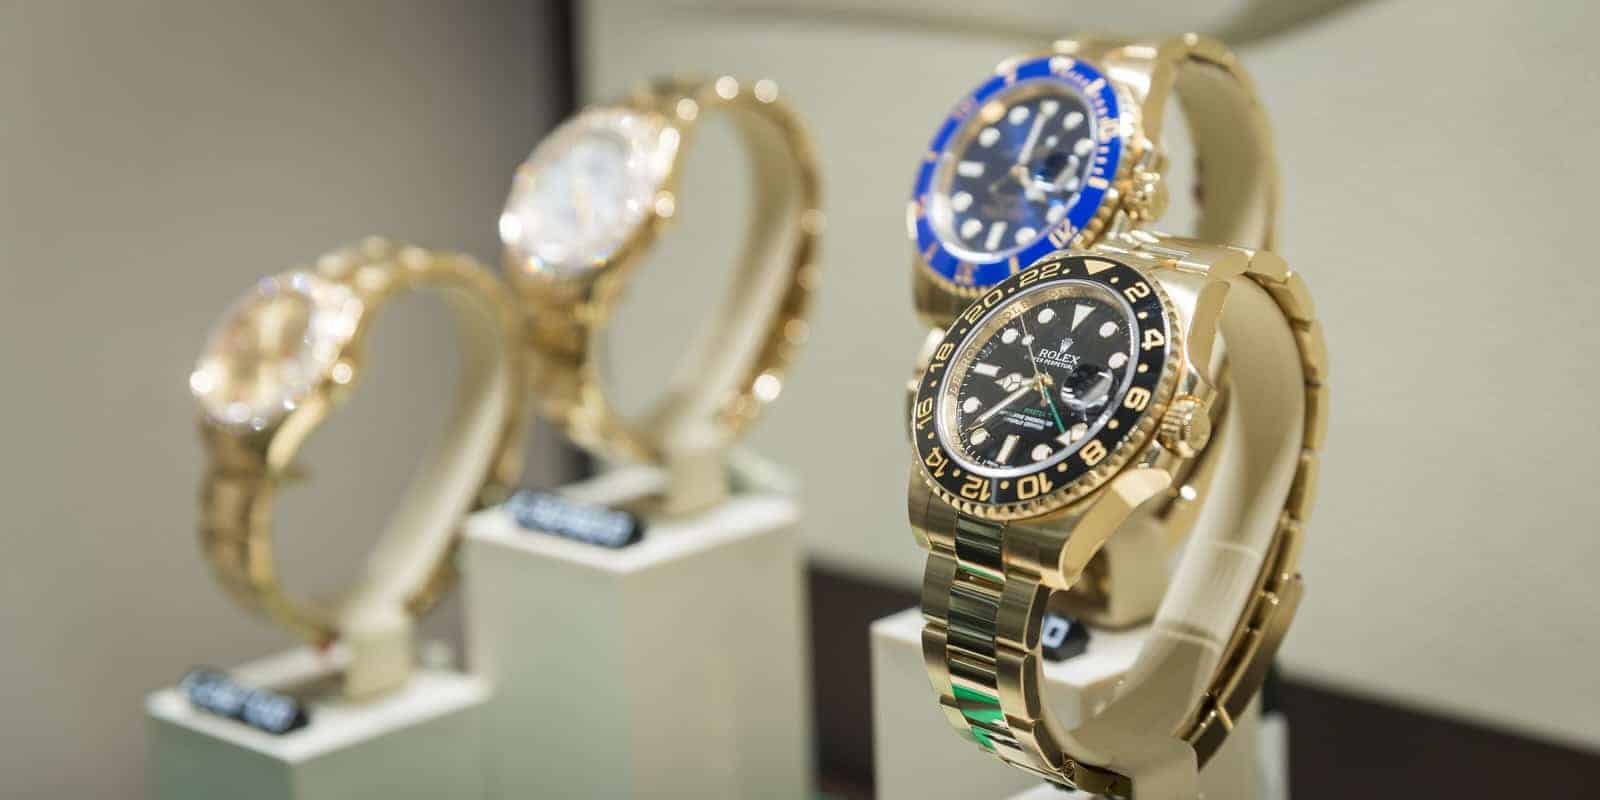 Rolex watches on display in a store.